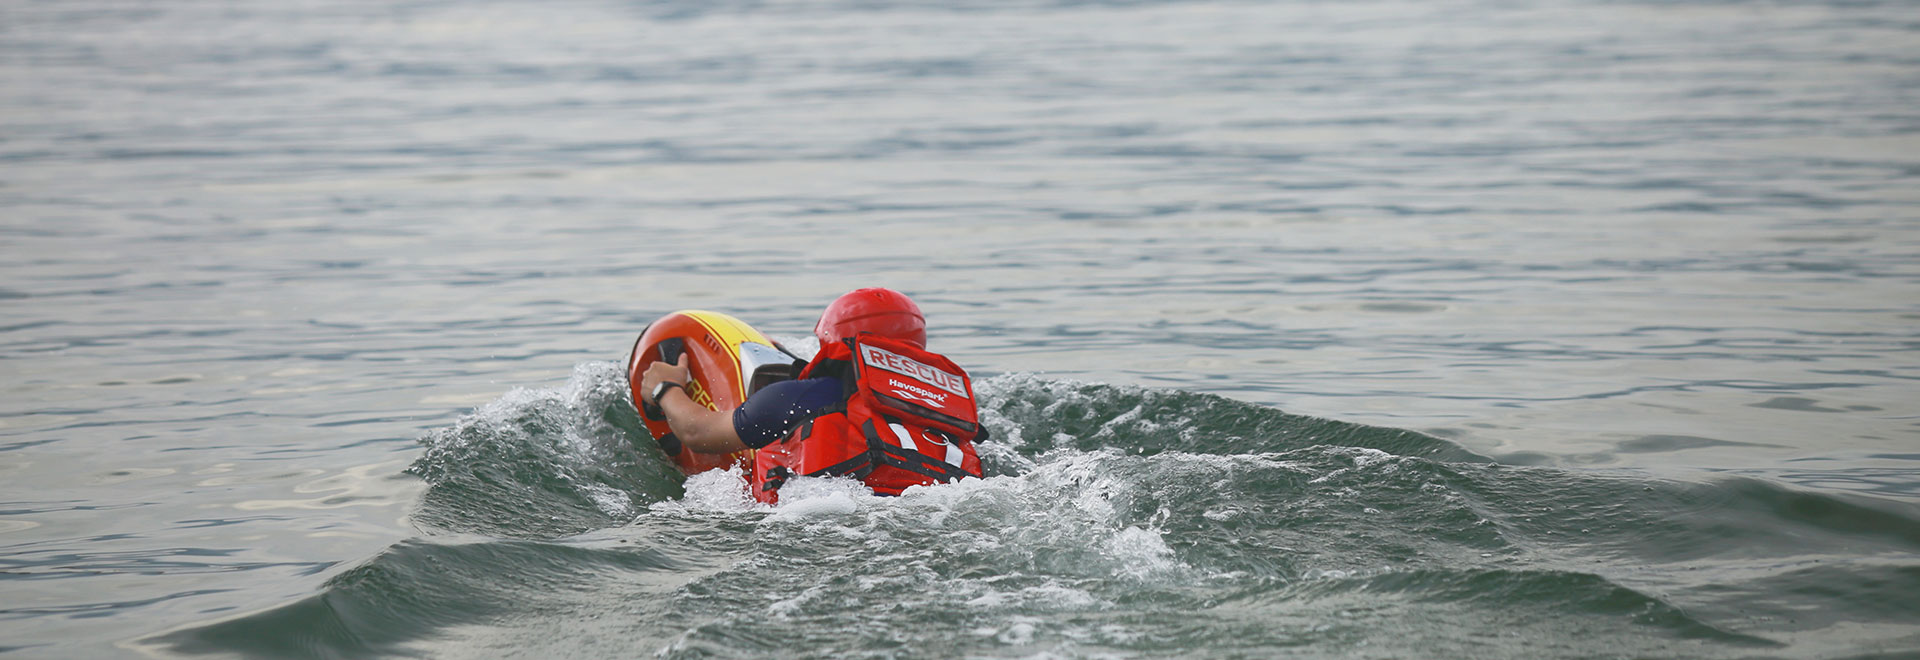 What Water Safety Supplies Should A Lifeguard Have?